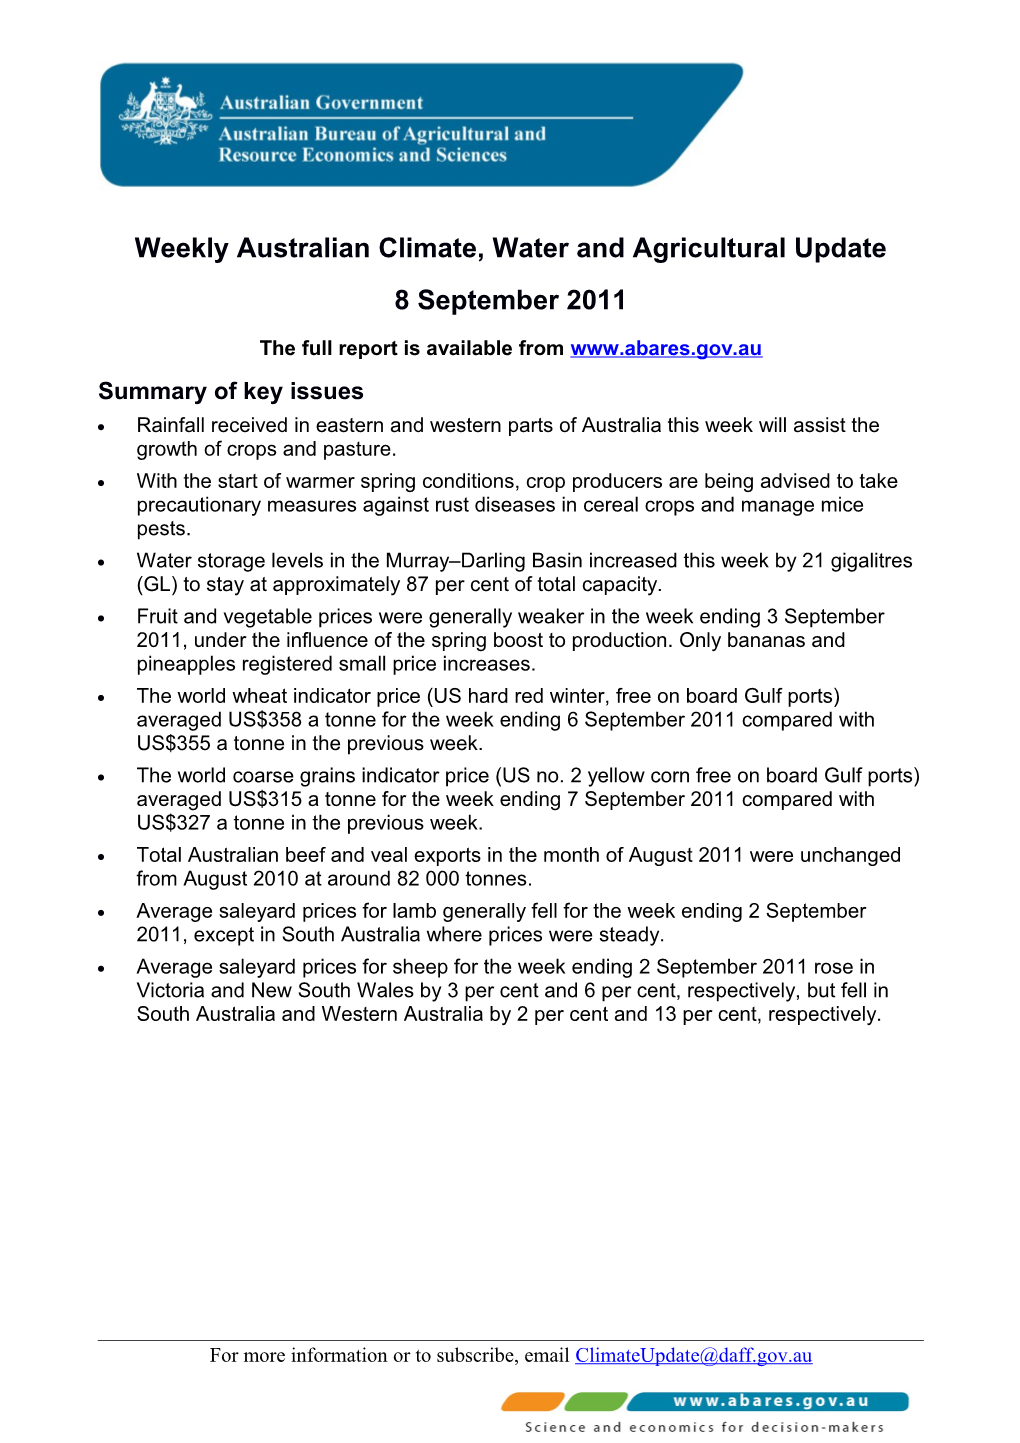 Weekly Australian Climate, Water and Agricultural Update